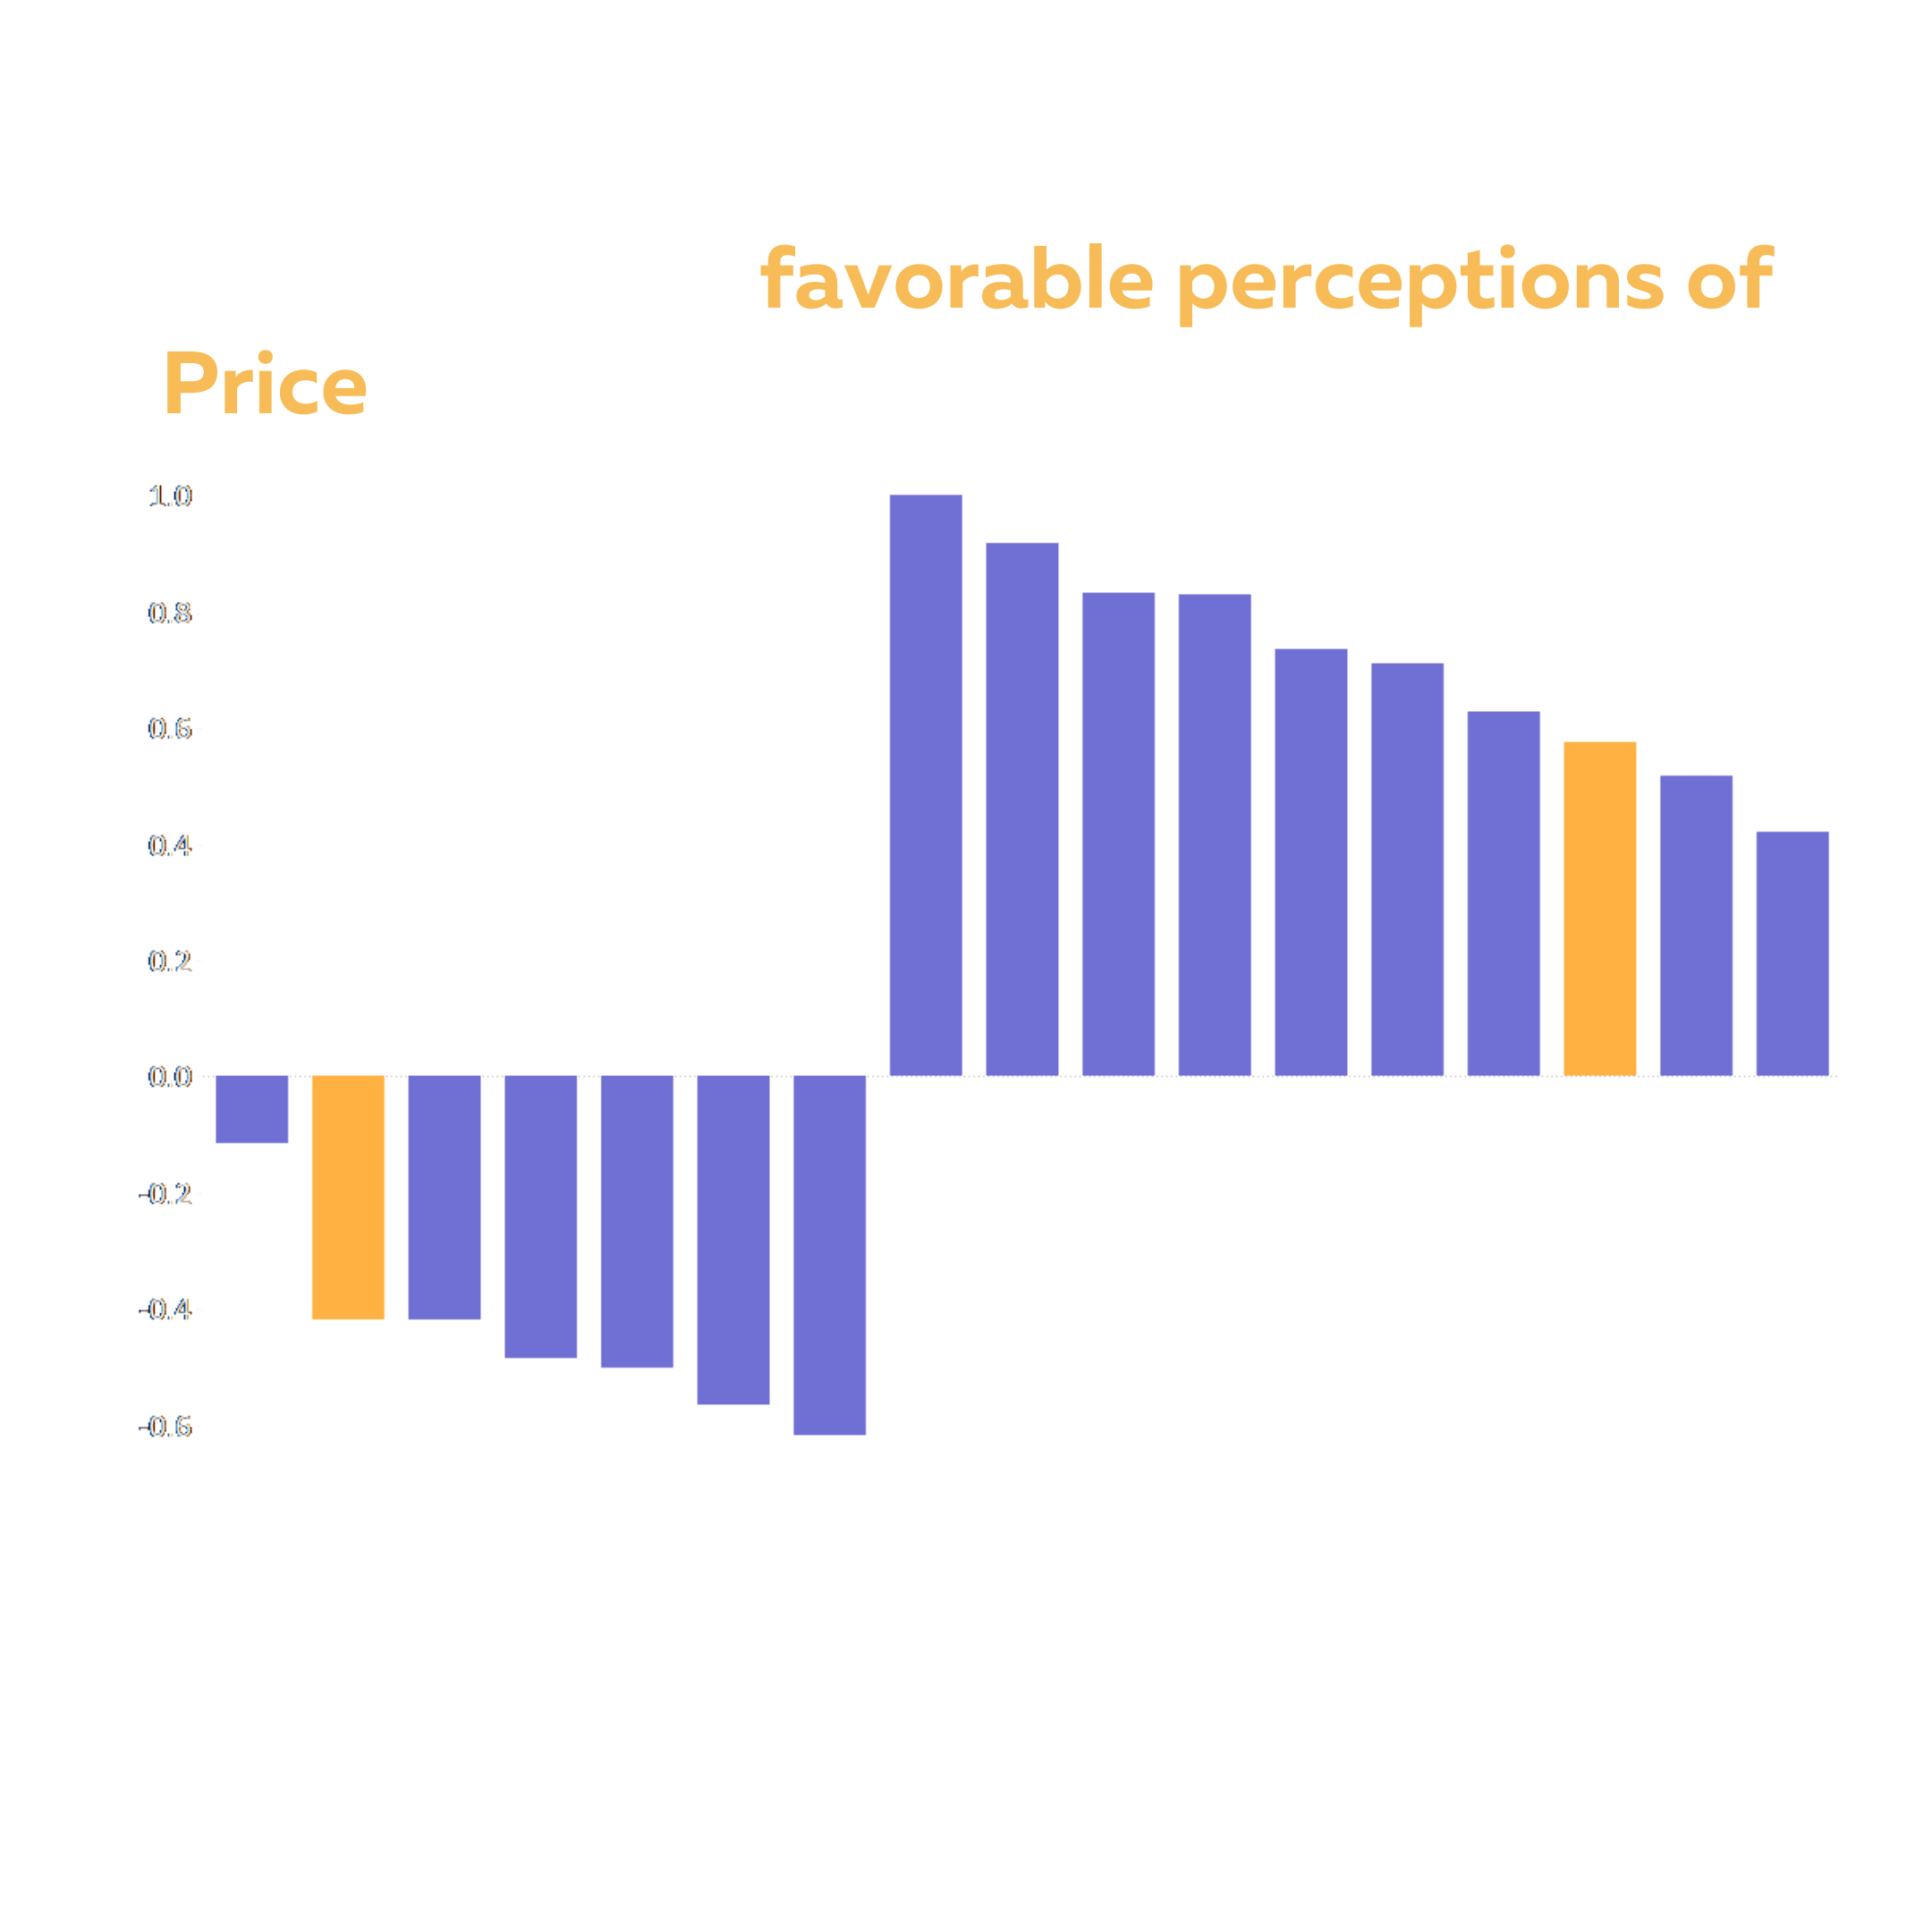 SALT maintains favorable perceptions of Price compared to other burger sports